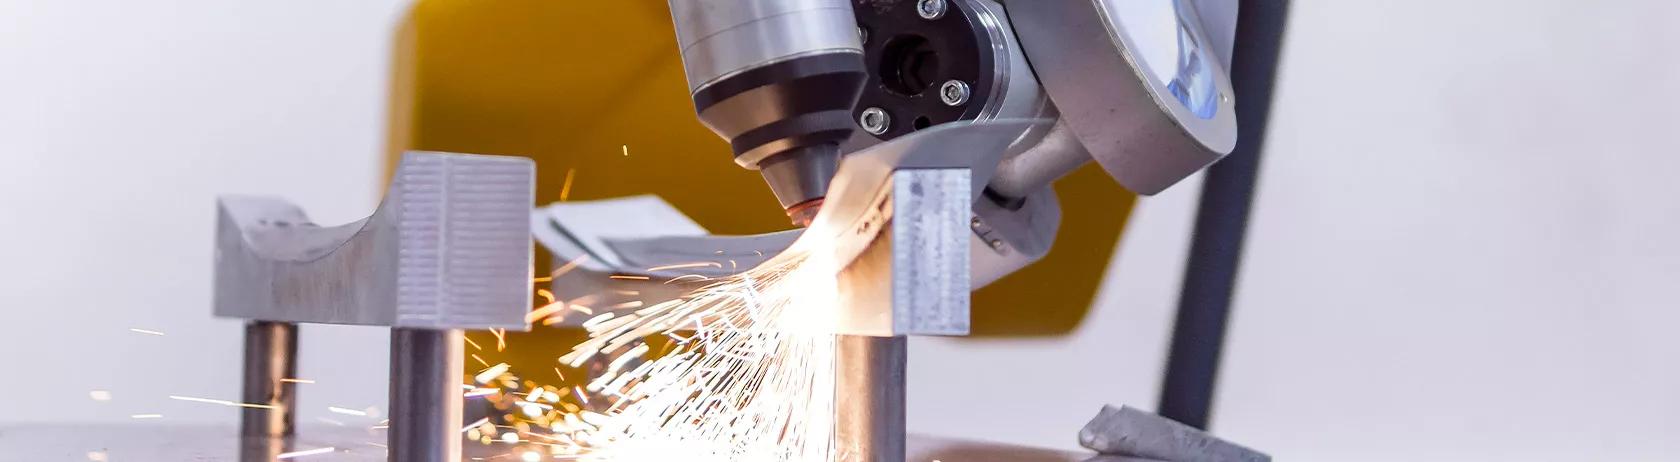 Robotic arm laser cutting metal with sparks